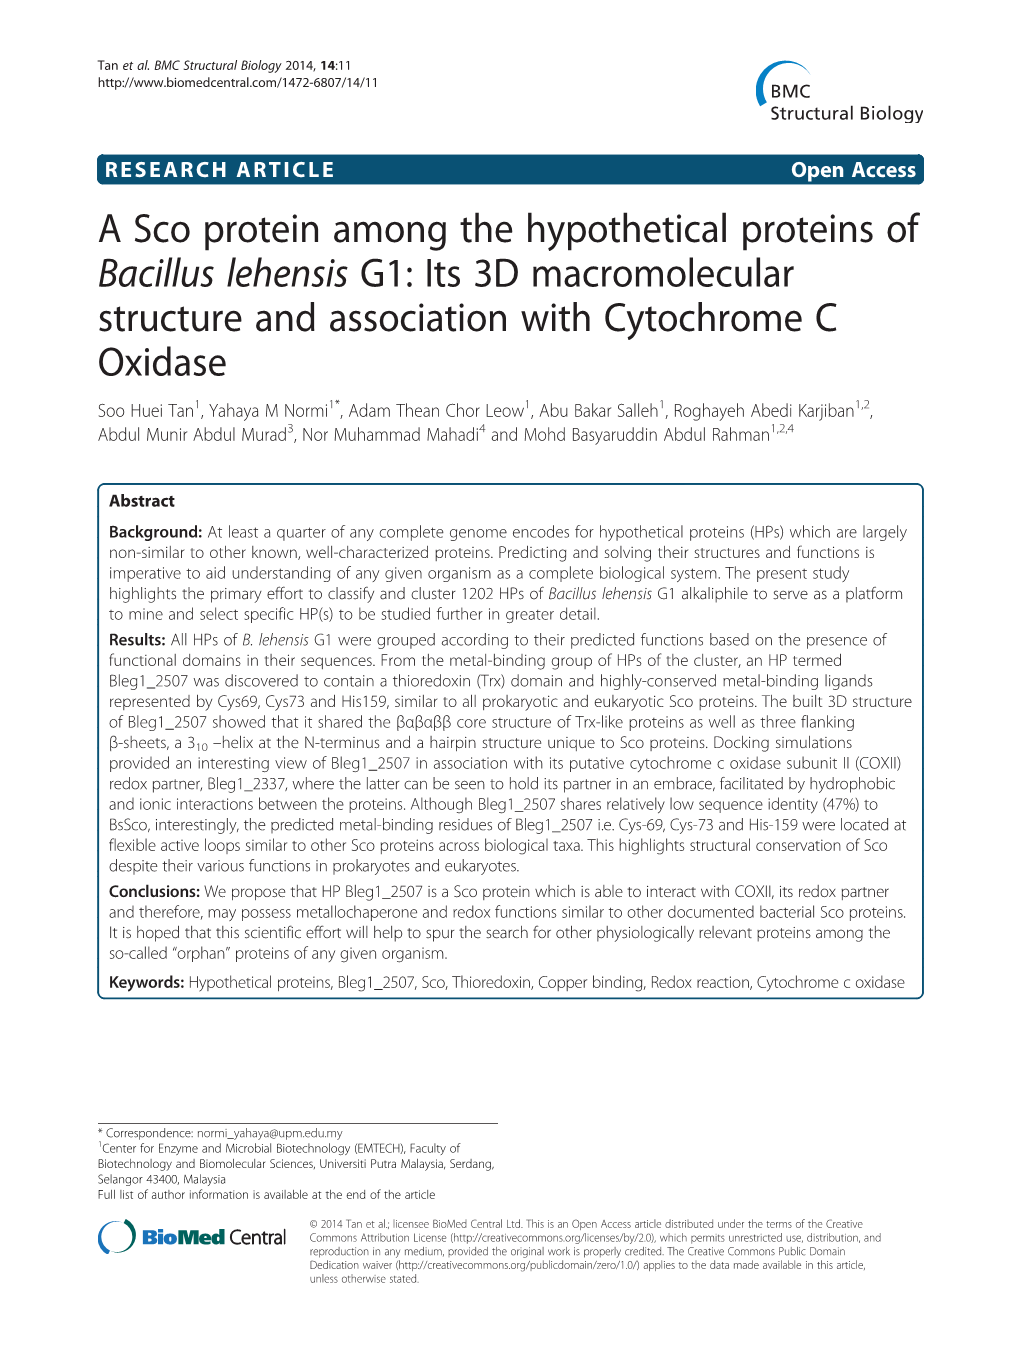 A Sco Protein Among the Hypothetical Proteins of Bacillus Lehensis G1: Its